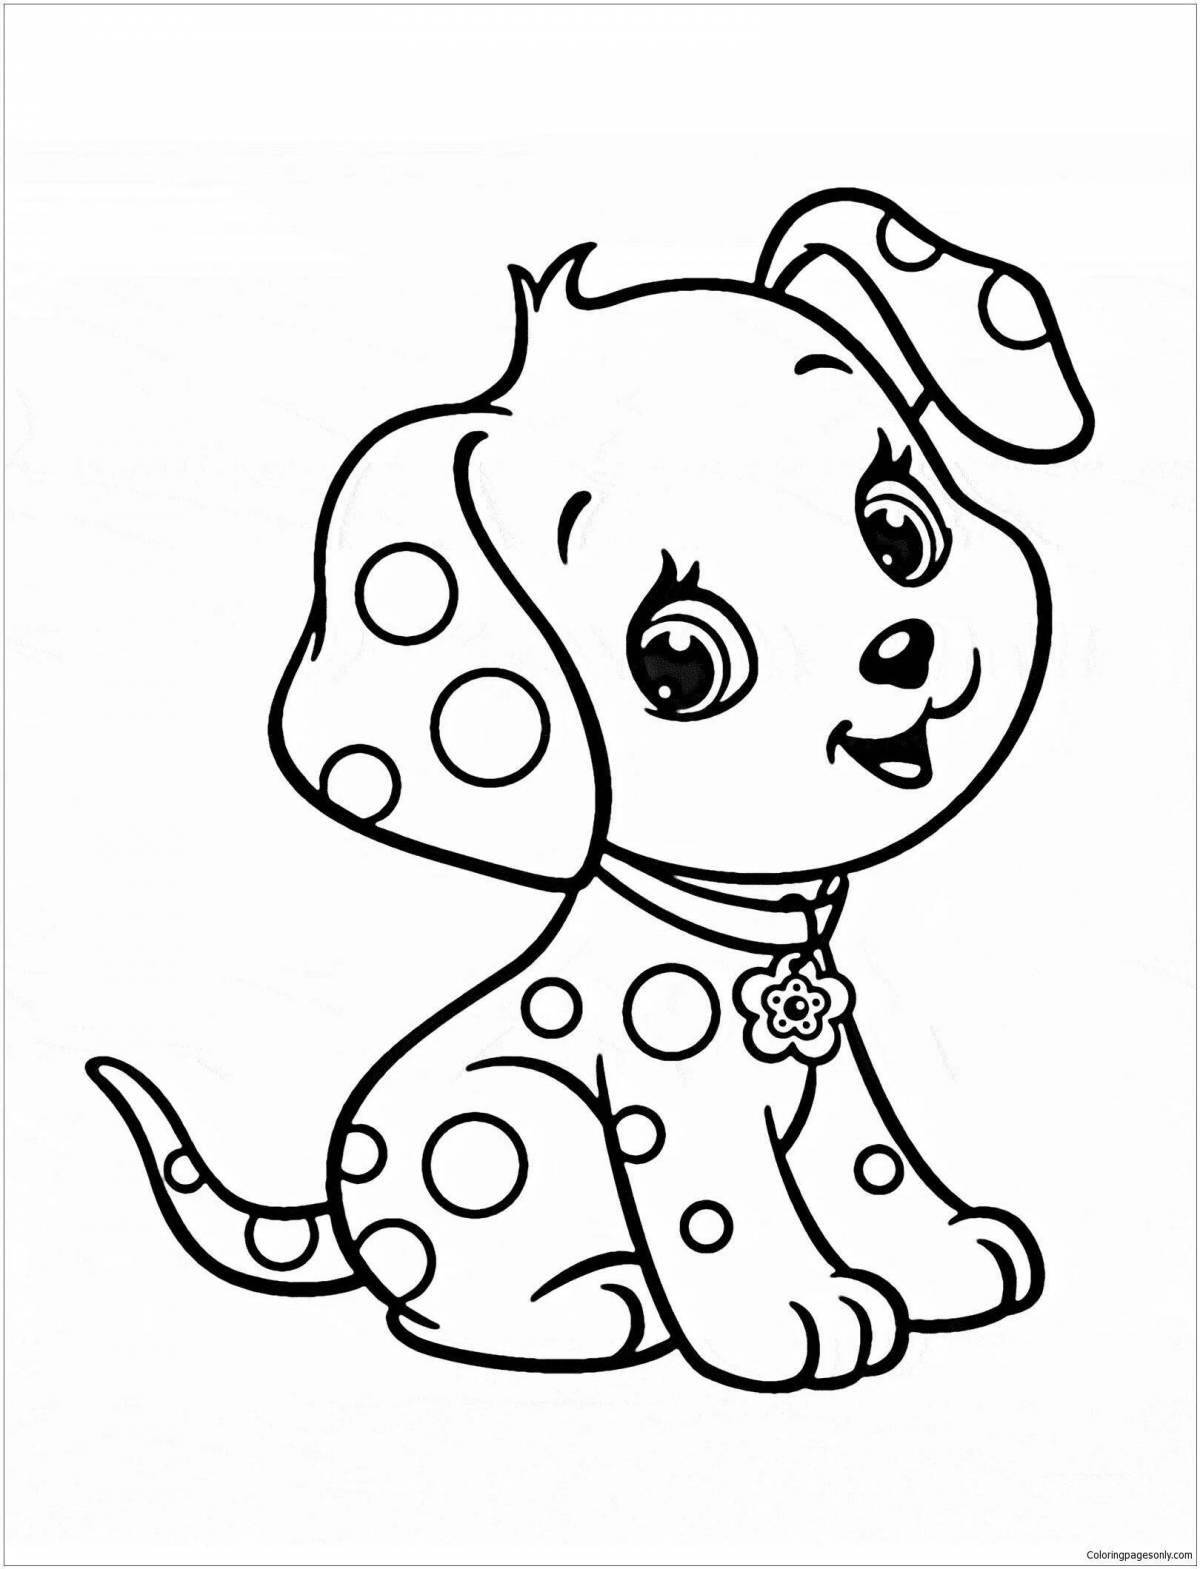 Live dogs coloring page